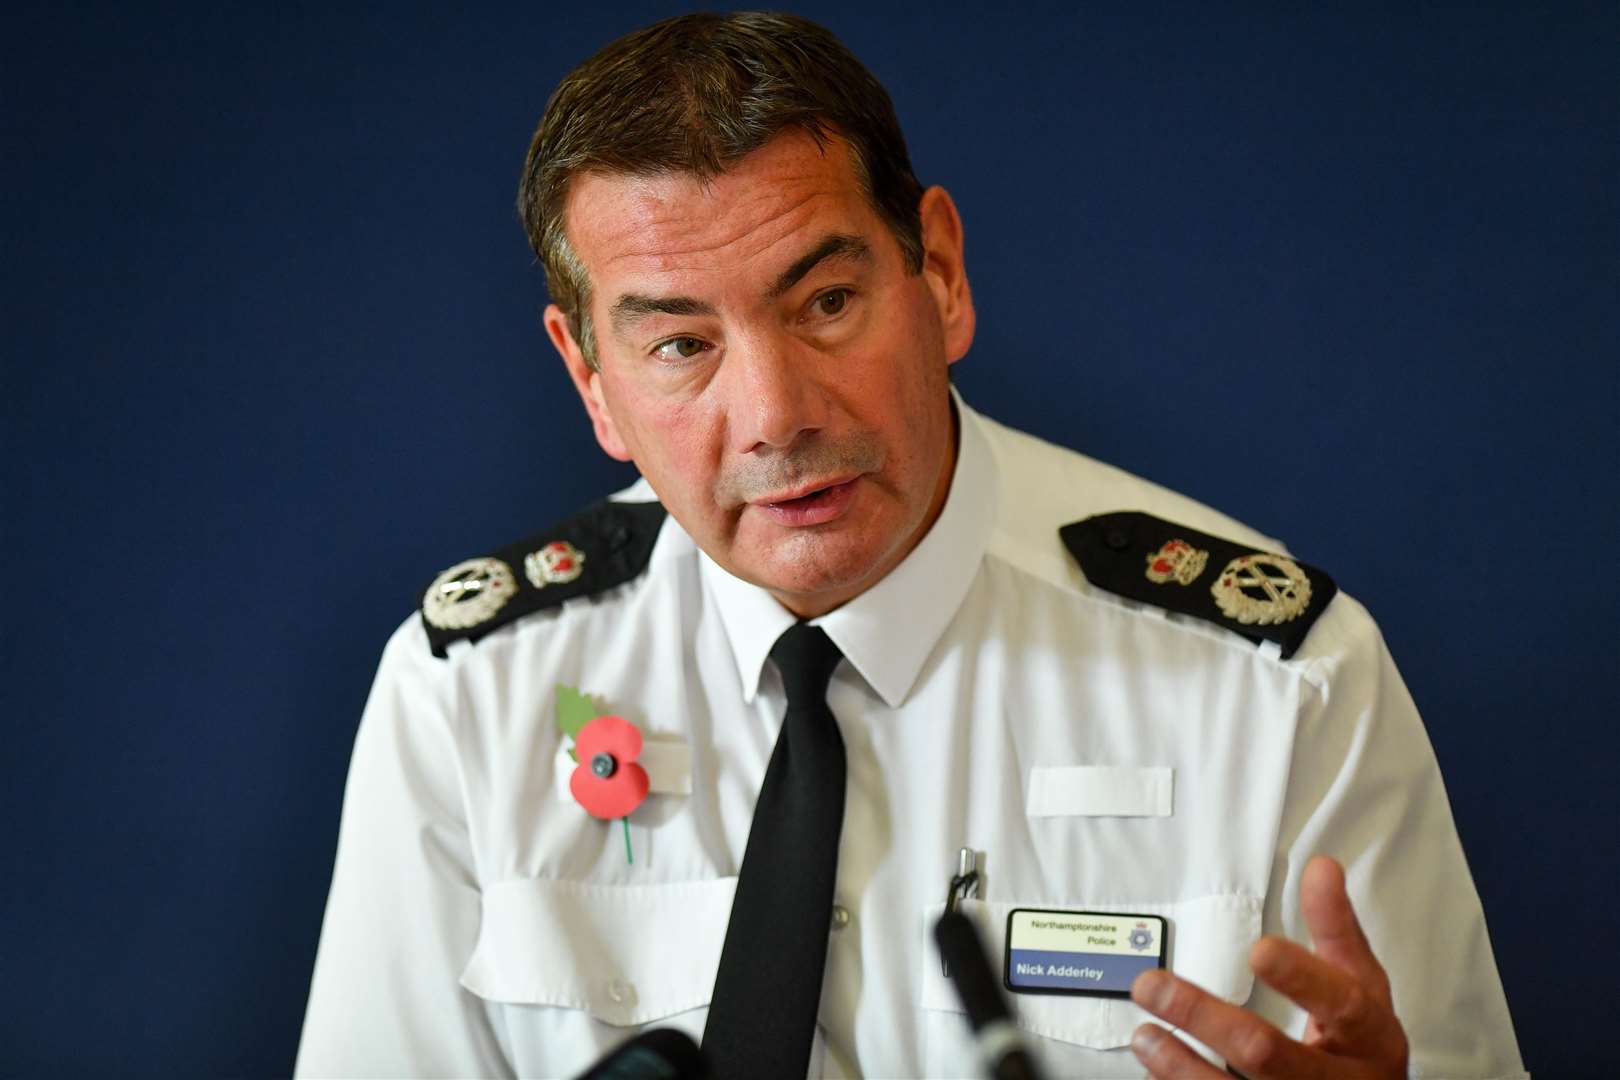 Nick Adderley pictured in 2019 (Jacob King/PA)